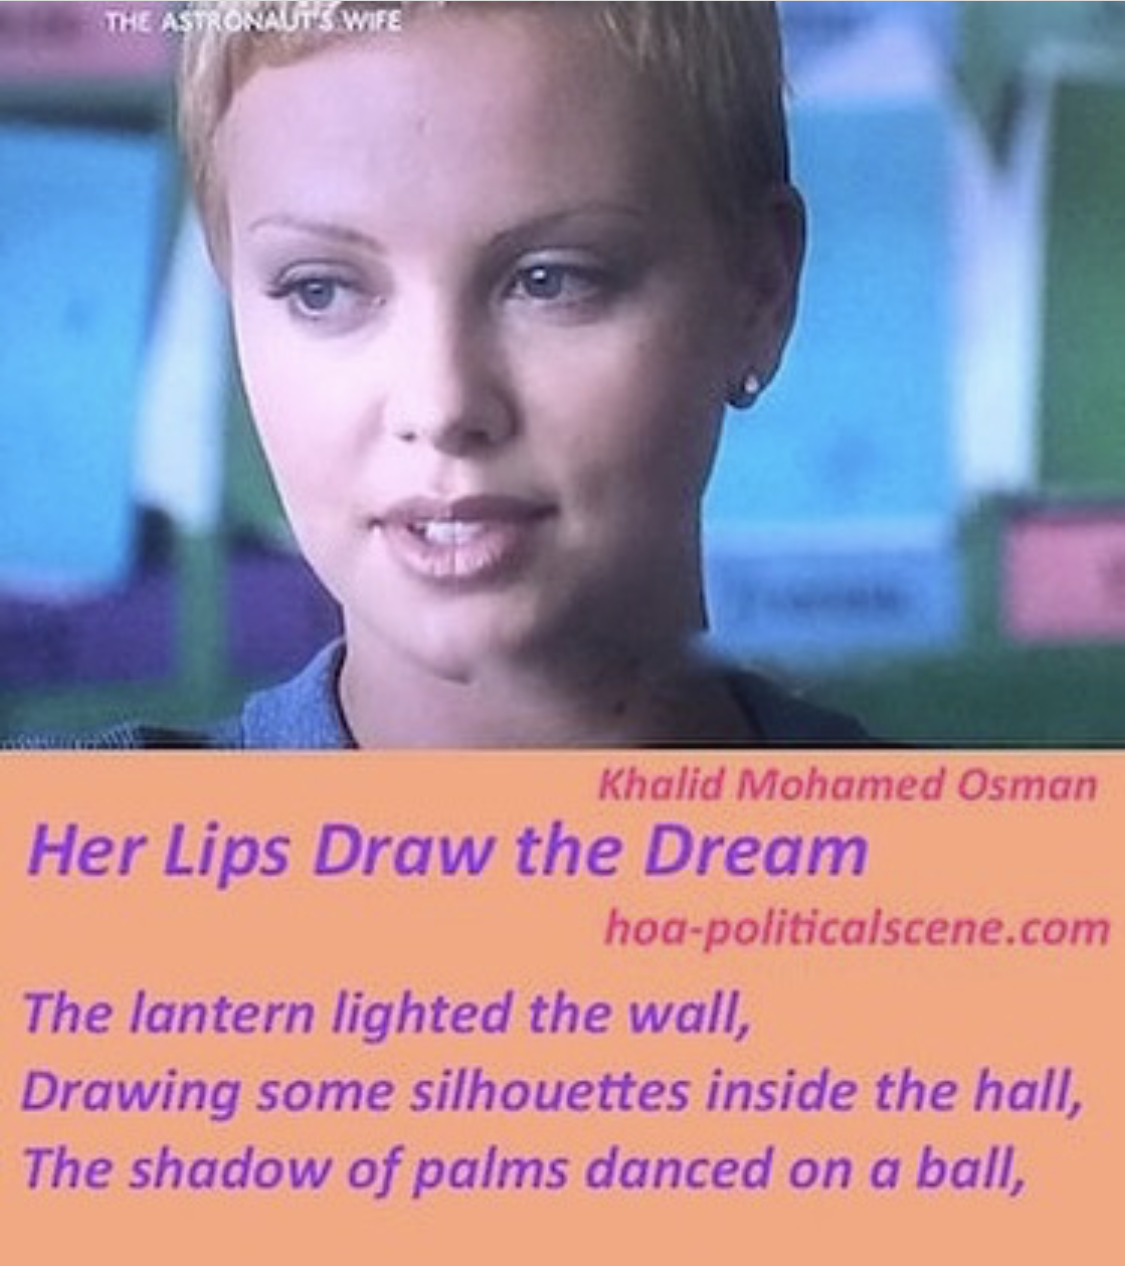 hoa-politicalscene.com/her-lips-draw-the-dream.html - Poetry snippet by poet Khalid Mohammed Osman "Her Lips Draw the Dream" on cinema star Charlize Theron's lips.